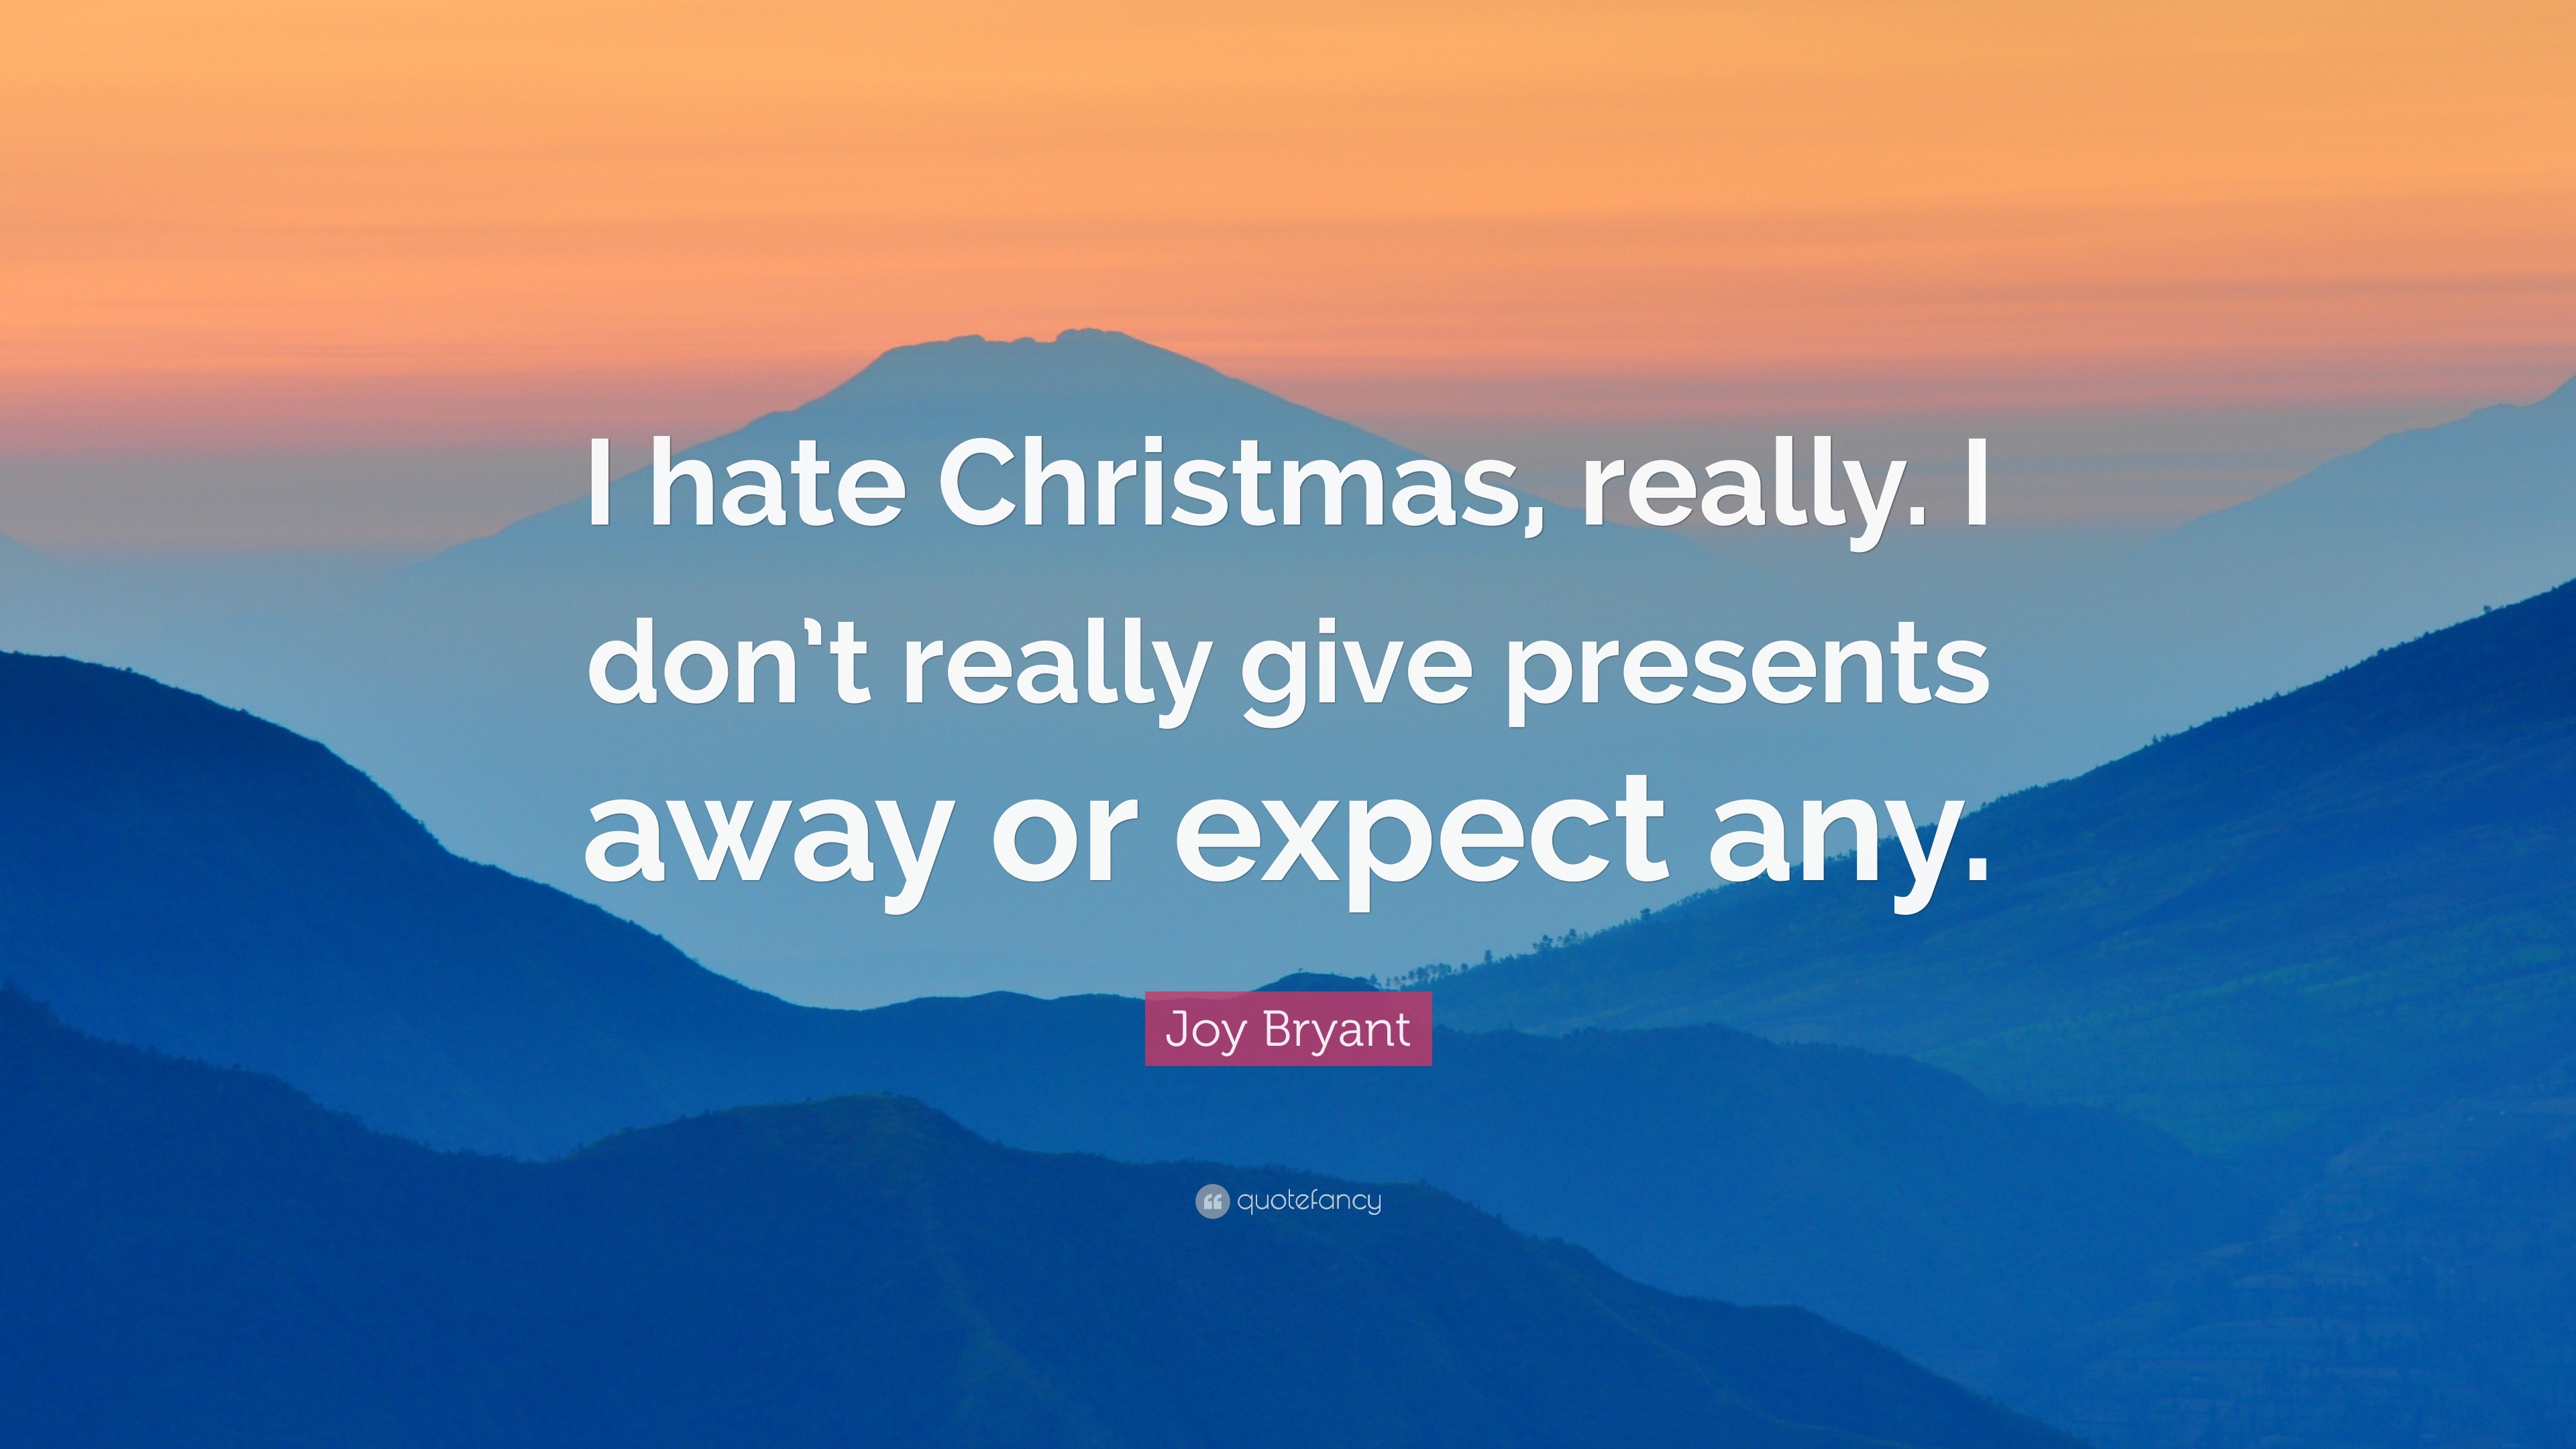 Joy Bryant Quote: “I hate Christmas, really. I don’t really give ...